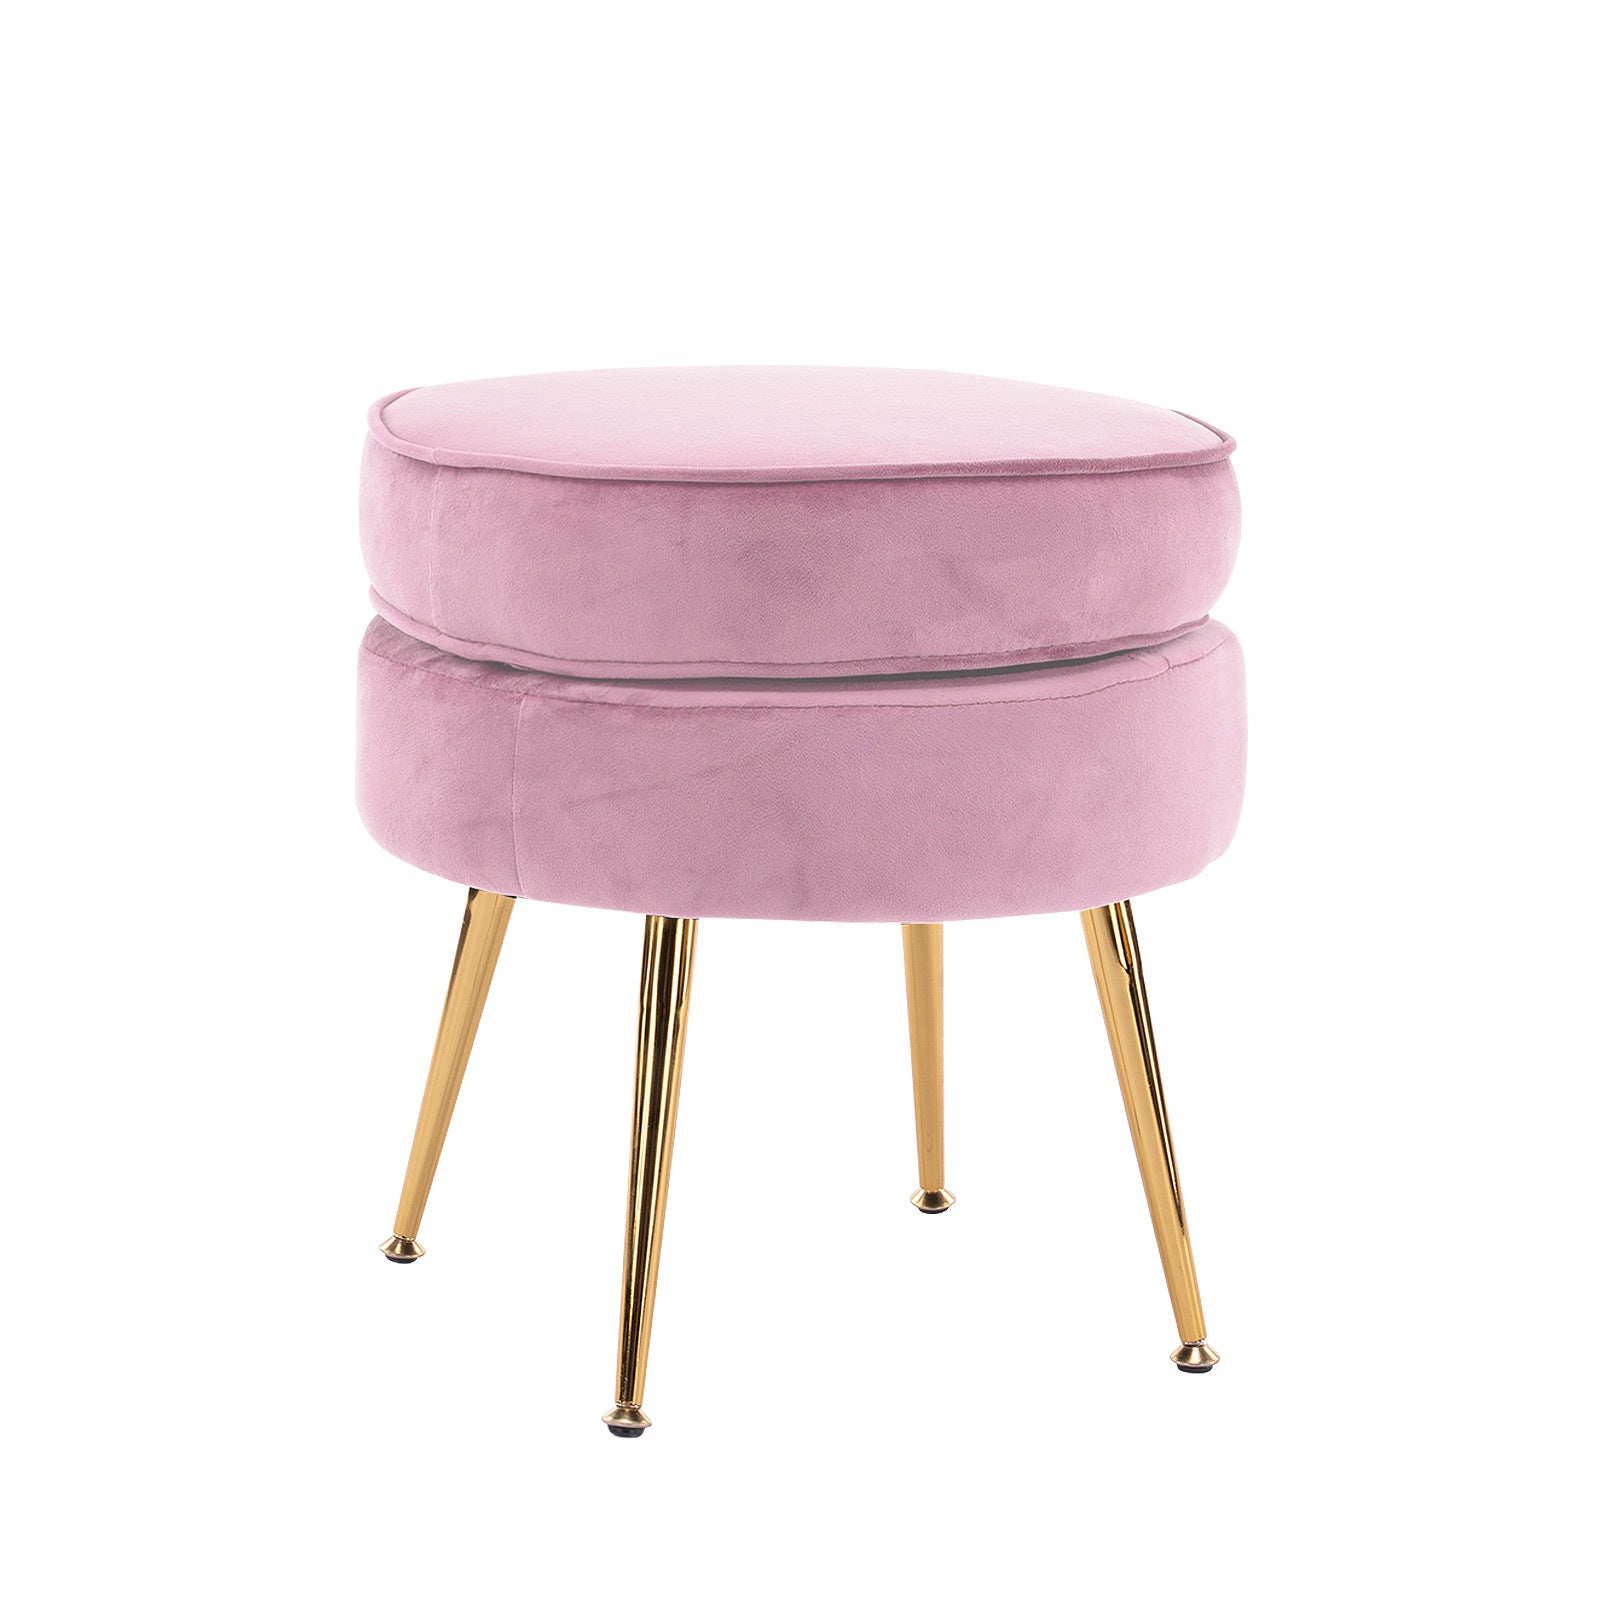 Free Shipping on this La Bella Pink Round Ottoman/Foot Stool in Velvet Fabric